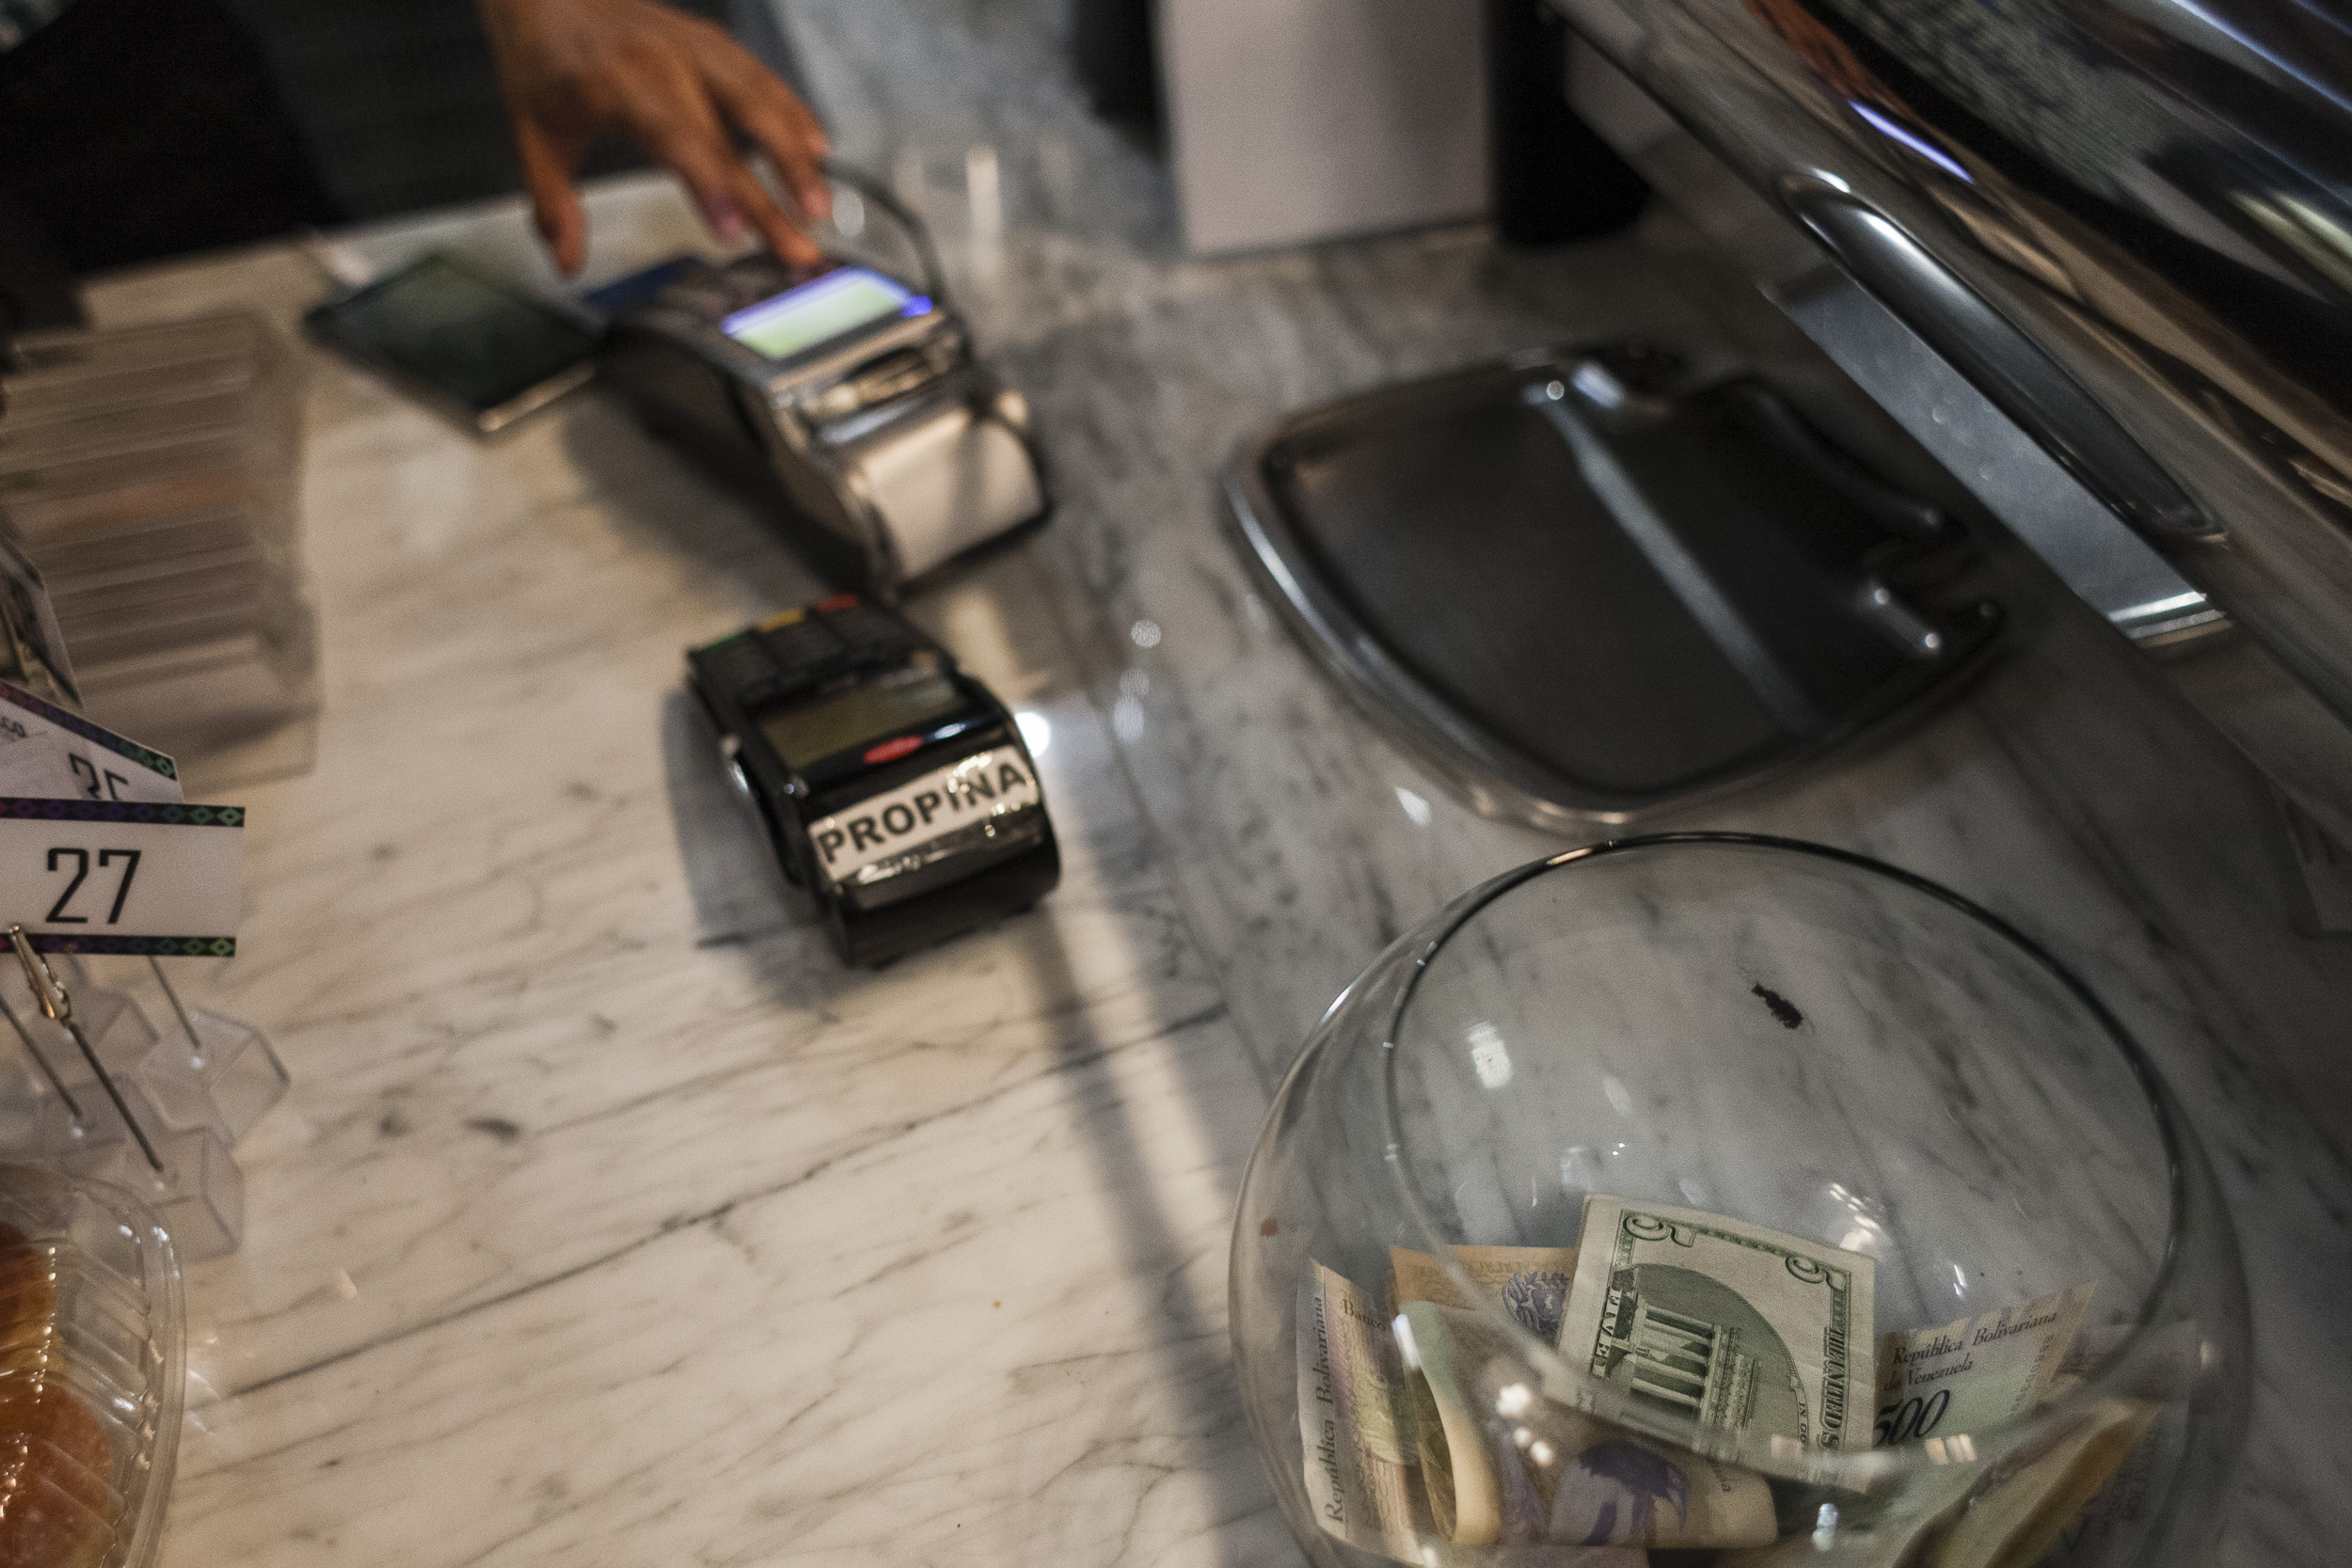 A tip jar filled with U.S. dollars and Venezuelan bolivares at a coffee shop in Caracas&nbsp;on&nbsp;June 5, 2019.&nbsp;